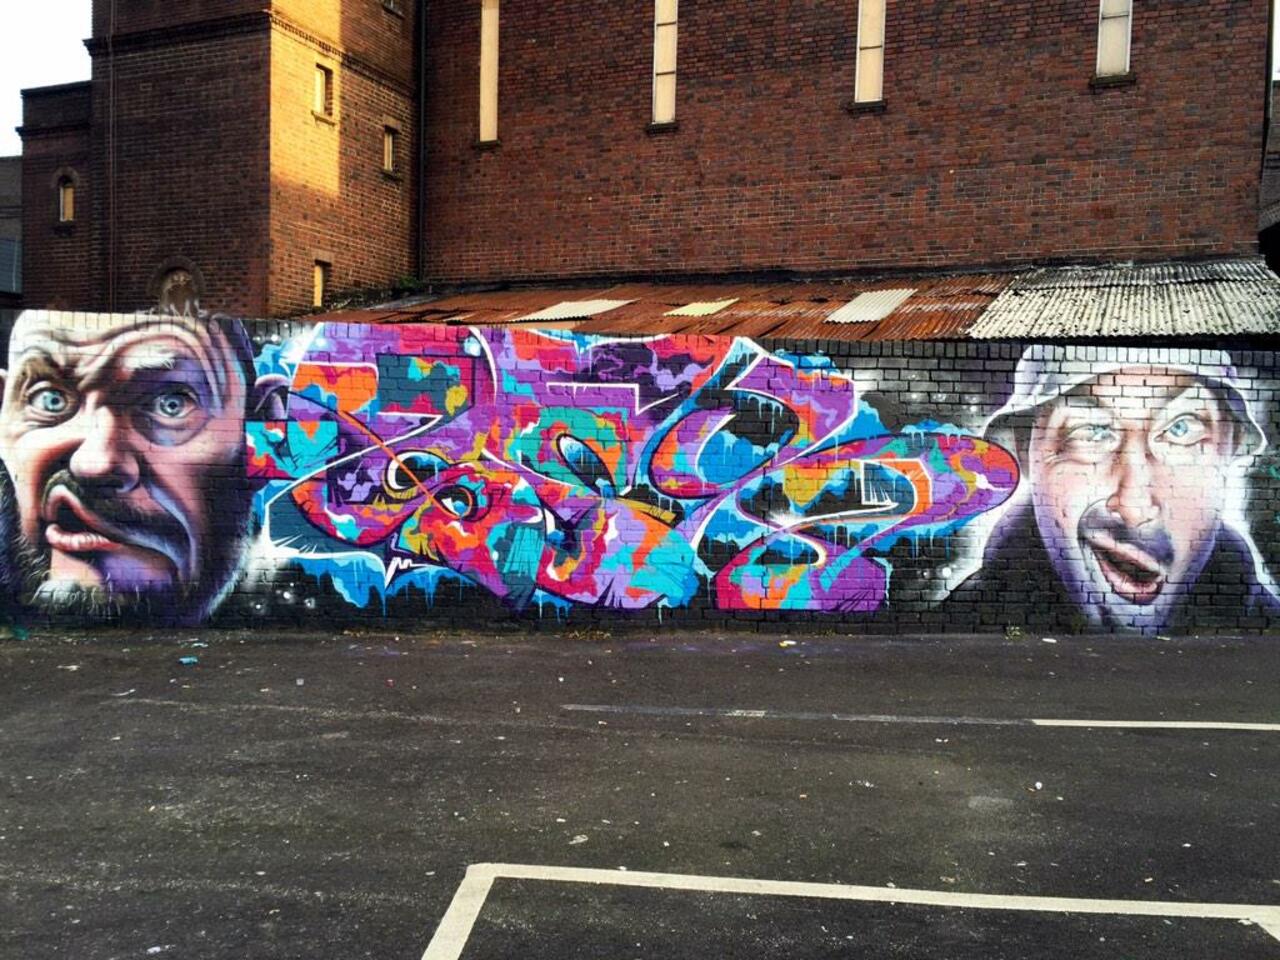 RT @djcolatron: Amazing new wall from Title and Mef in #Digbeth #Birmingham : #streetart #graffiti #portrait #mural  http://t.co/dRLe5UVgwg